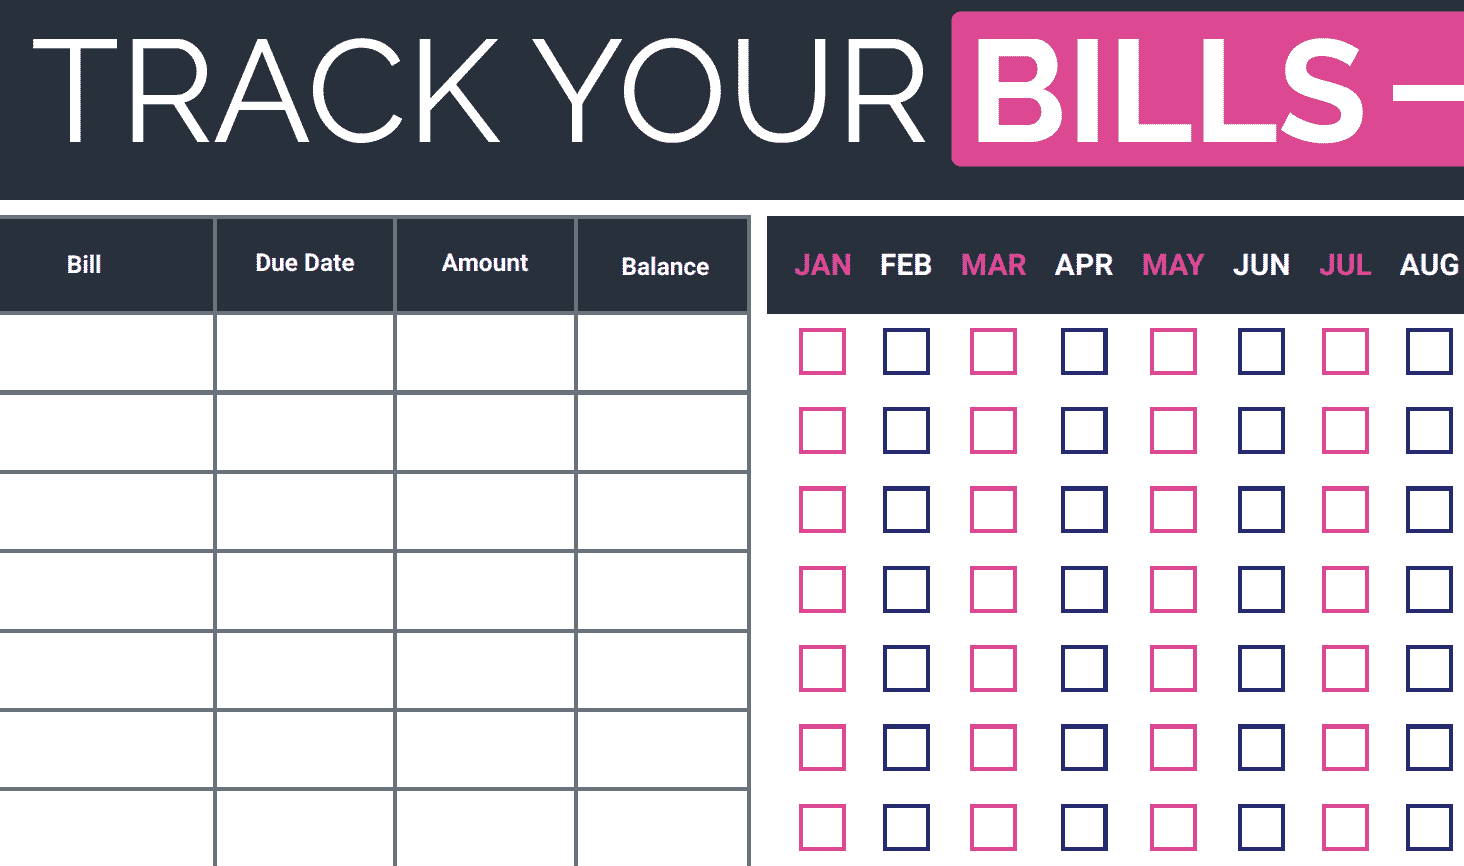 Free Bill Payment Tracker Printable - How To Organize Bills Every Month